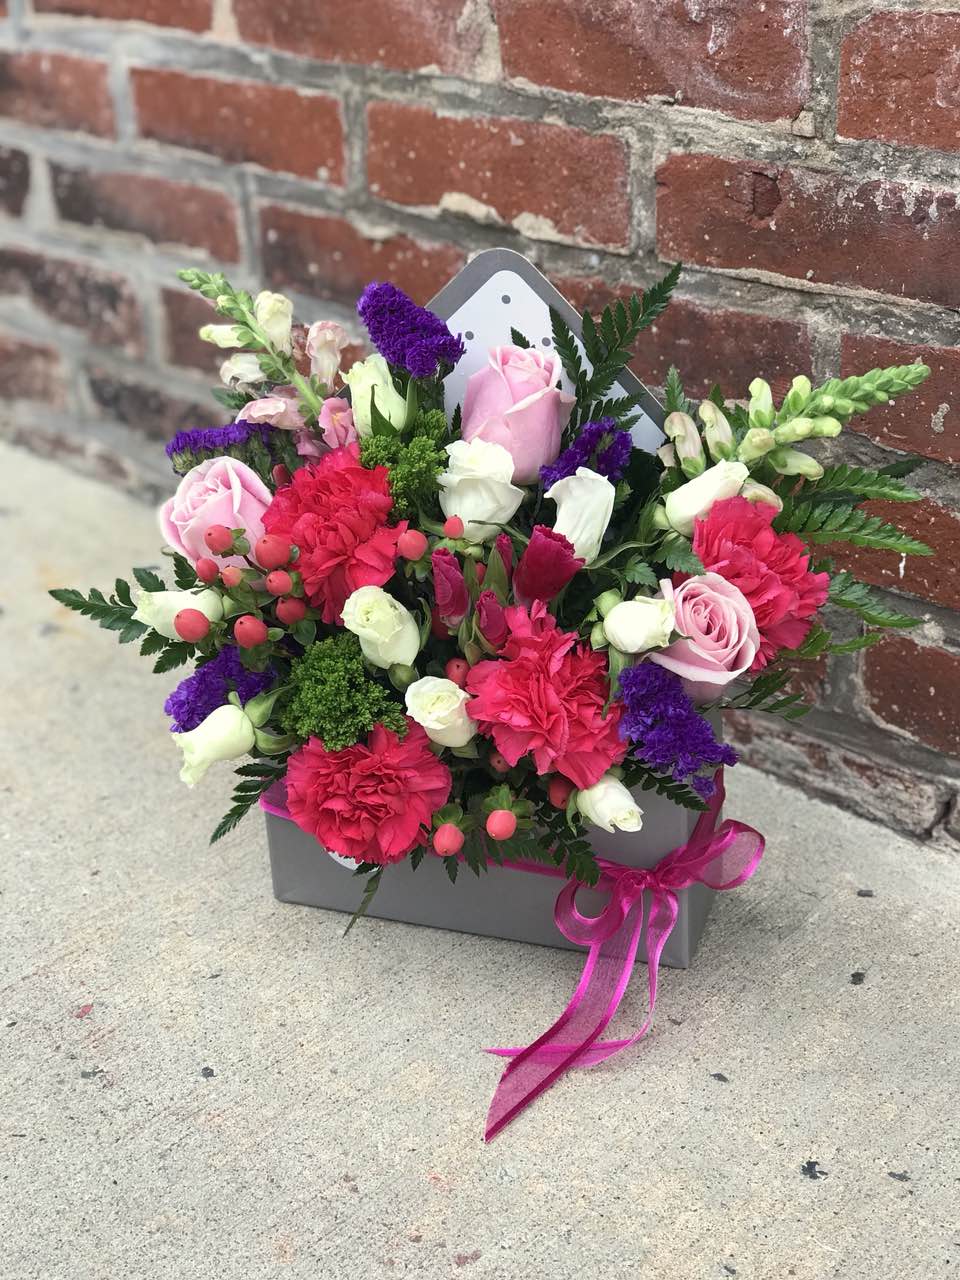 Show your romantic side by sending this gorgeous arrangement in a charming  envelope. She'll love the gift, and you for having such amazingly good taste. Includes: Hot pink carnations, pink roses, berries, snap dragons, purple stacice. Floral envelope. Free message card Available for same day delivery!